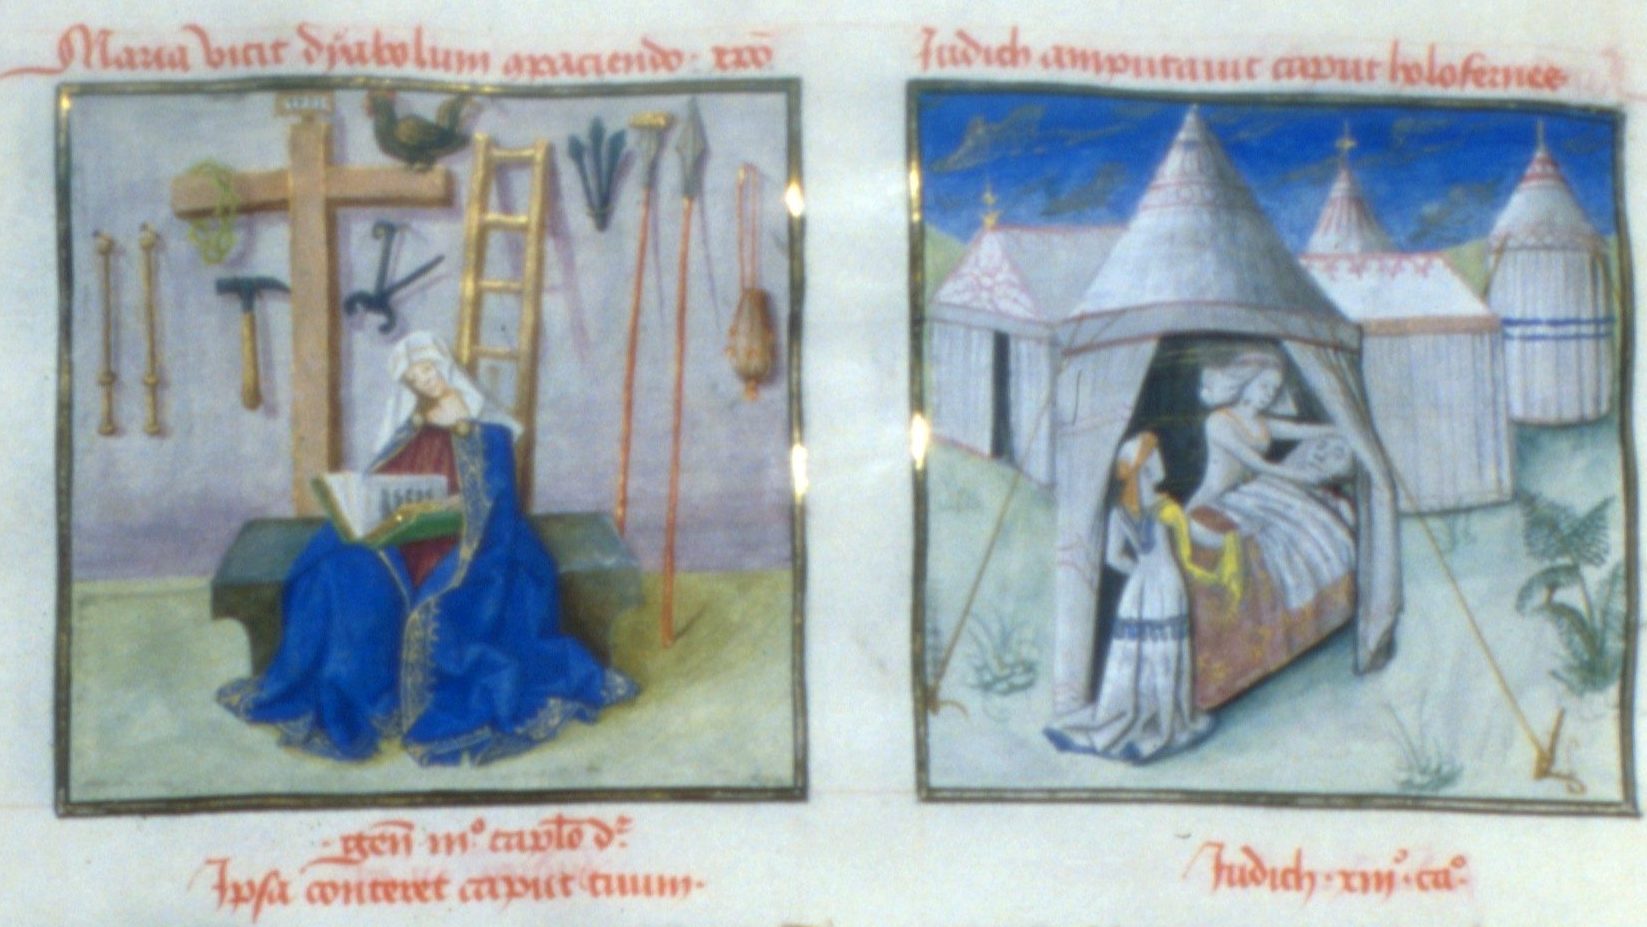 A medieval manuscript page with text and two panes. The first pane depicts a woman in blue, sitting reading a large book with crucifixion implements behind her. The second depicts two women in a tent, one of whom is cutting off the head of a man lying in bed.